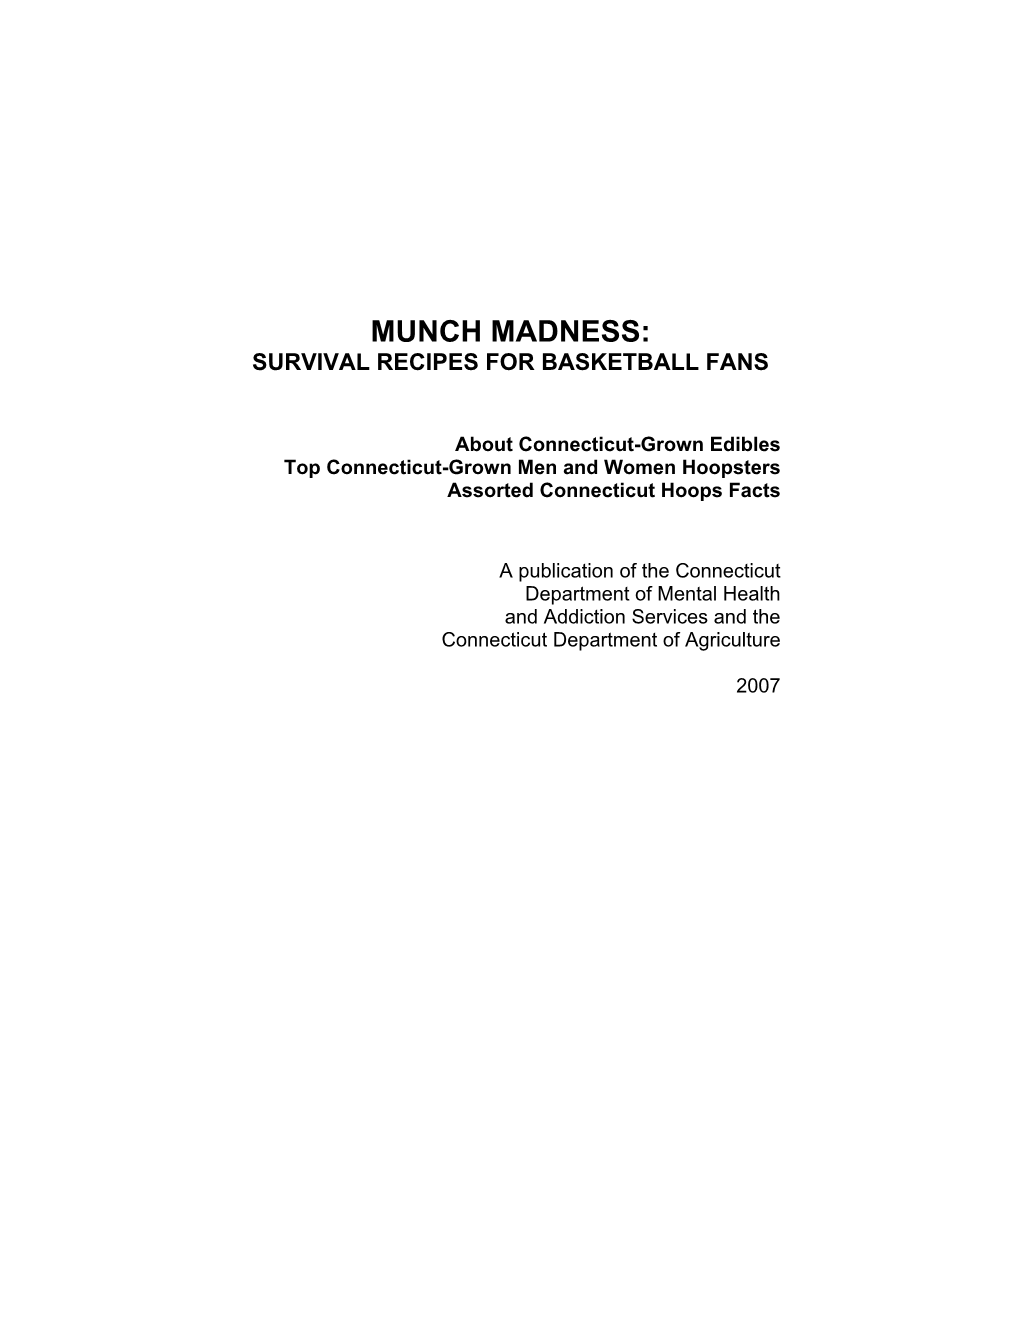 Munch Madness: Survival Recipes for Basketball Fans